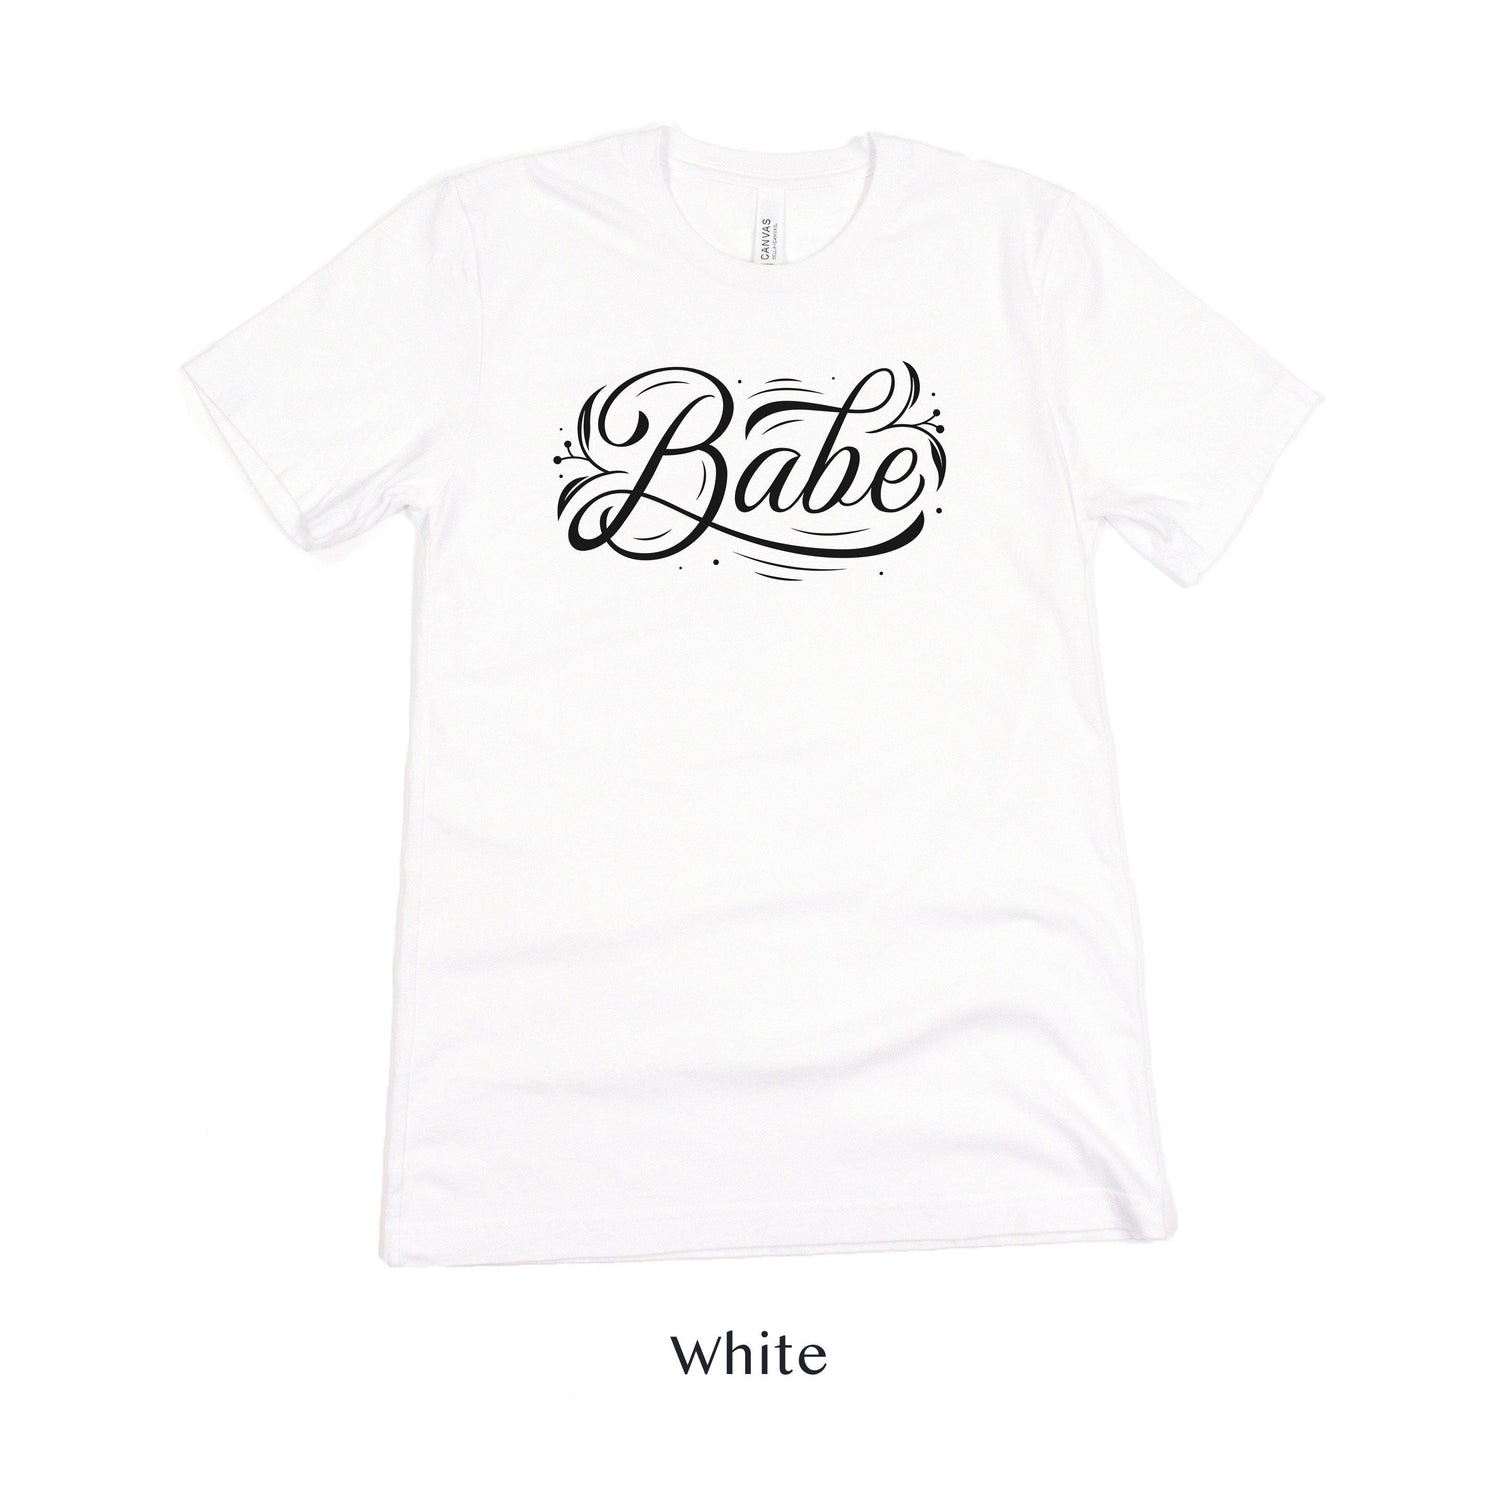 Babe Short-Sleeve Tee - Bach Weekend and Bridal Proposal Box Shirt - Plus Sizes Available! by Oaklynn Lane - white tshirt